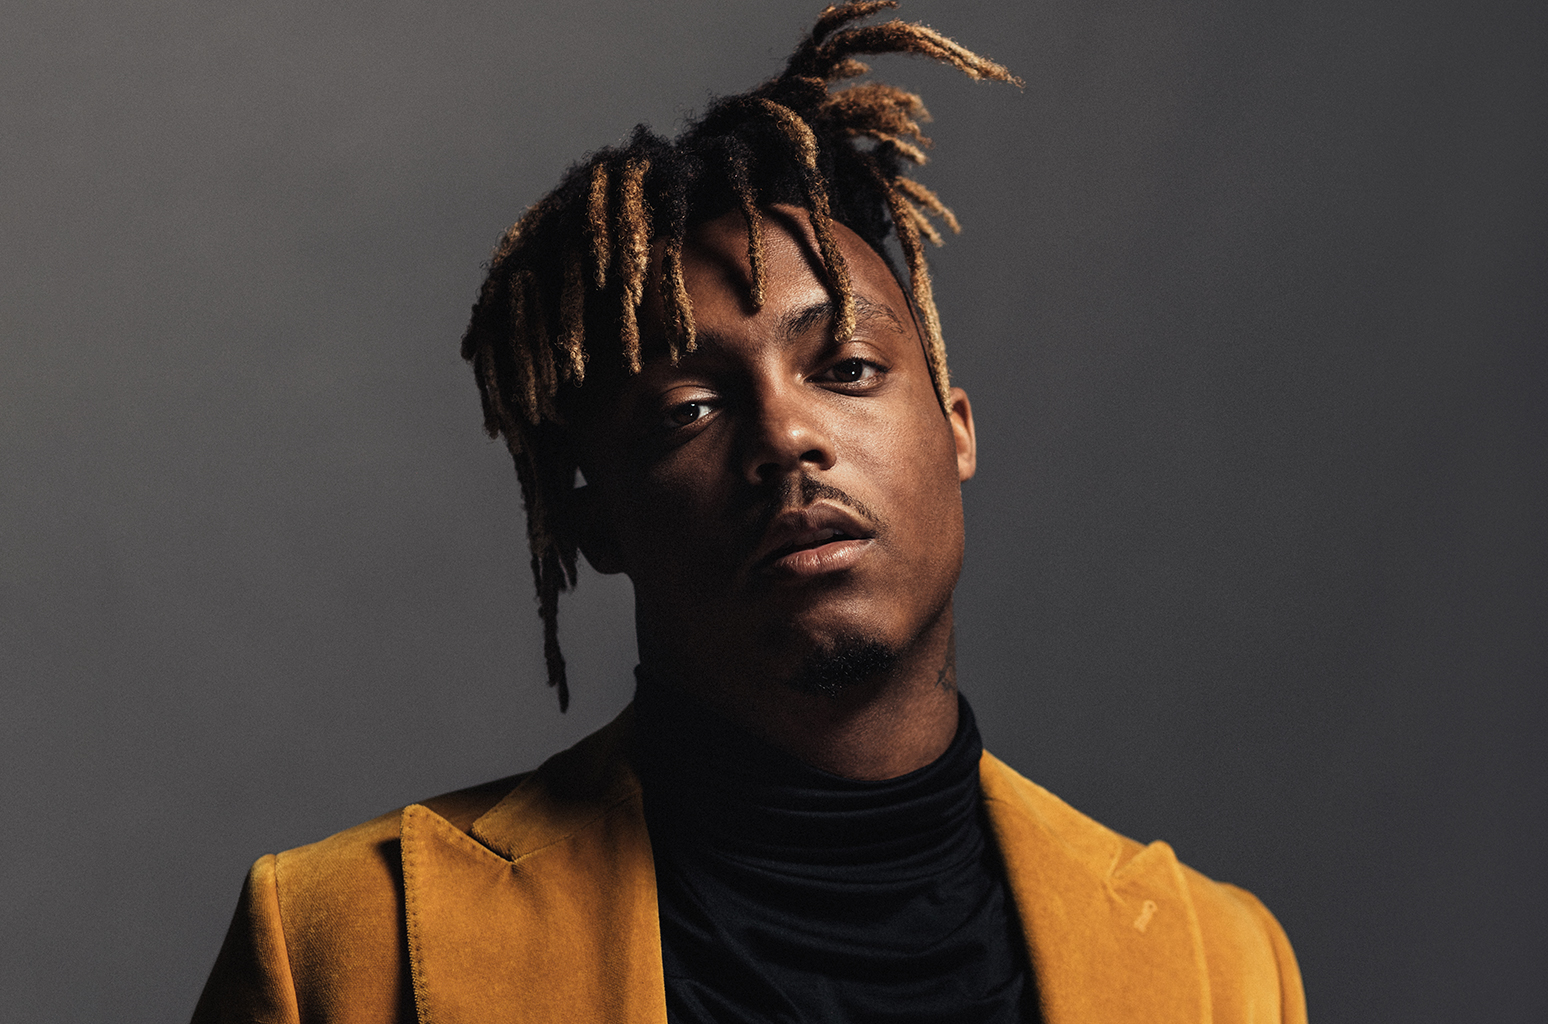 Juice WRLD’s Mom Speaks Out About Son’s Death And Brings Awareness To Drug Addiction